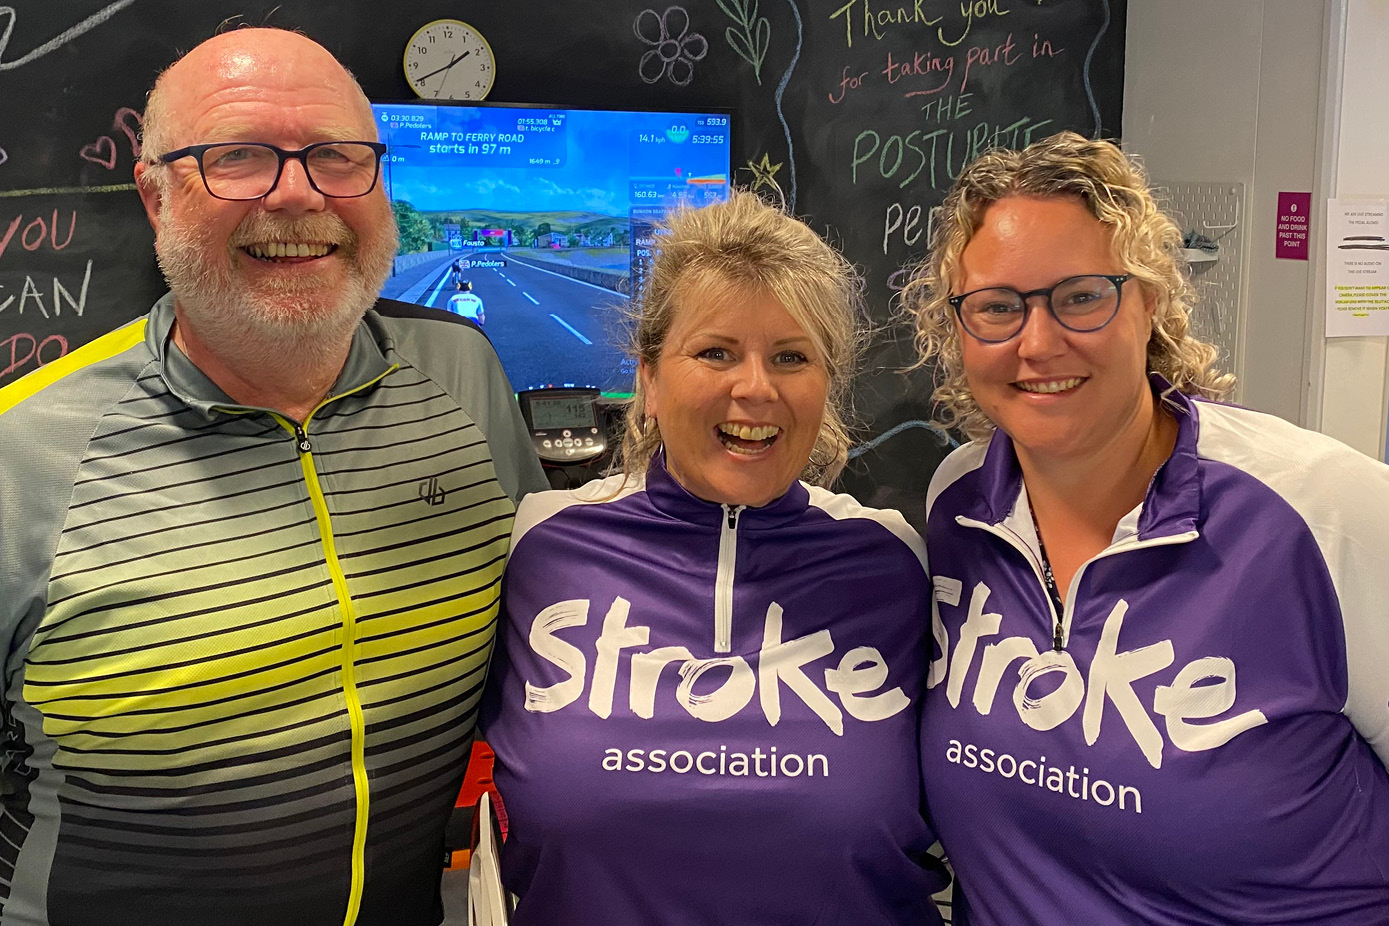 Posturite employees support the corporate partnership with the Stroke Association